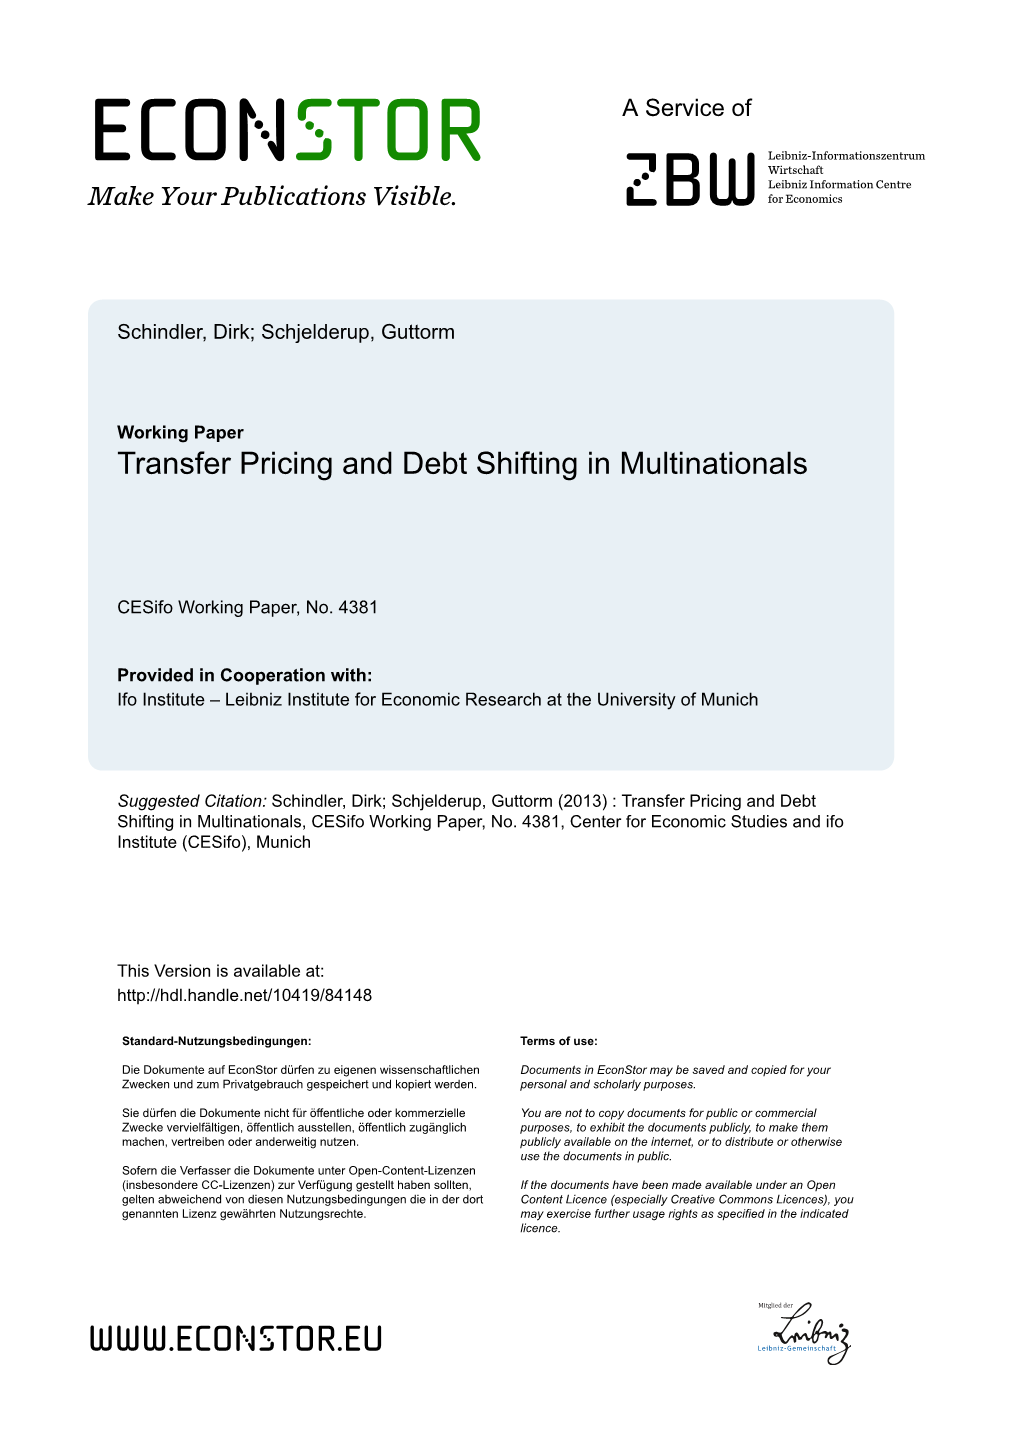 Transfer Pricing and Debt Shifting in Multinationals